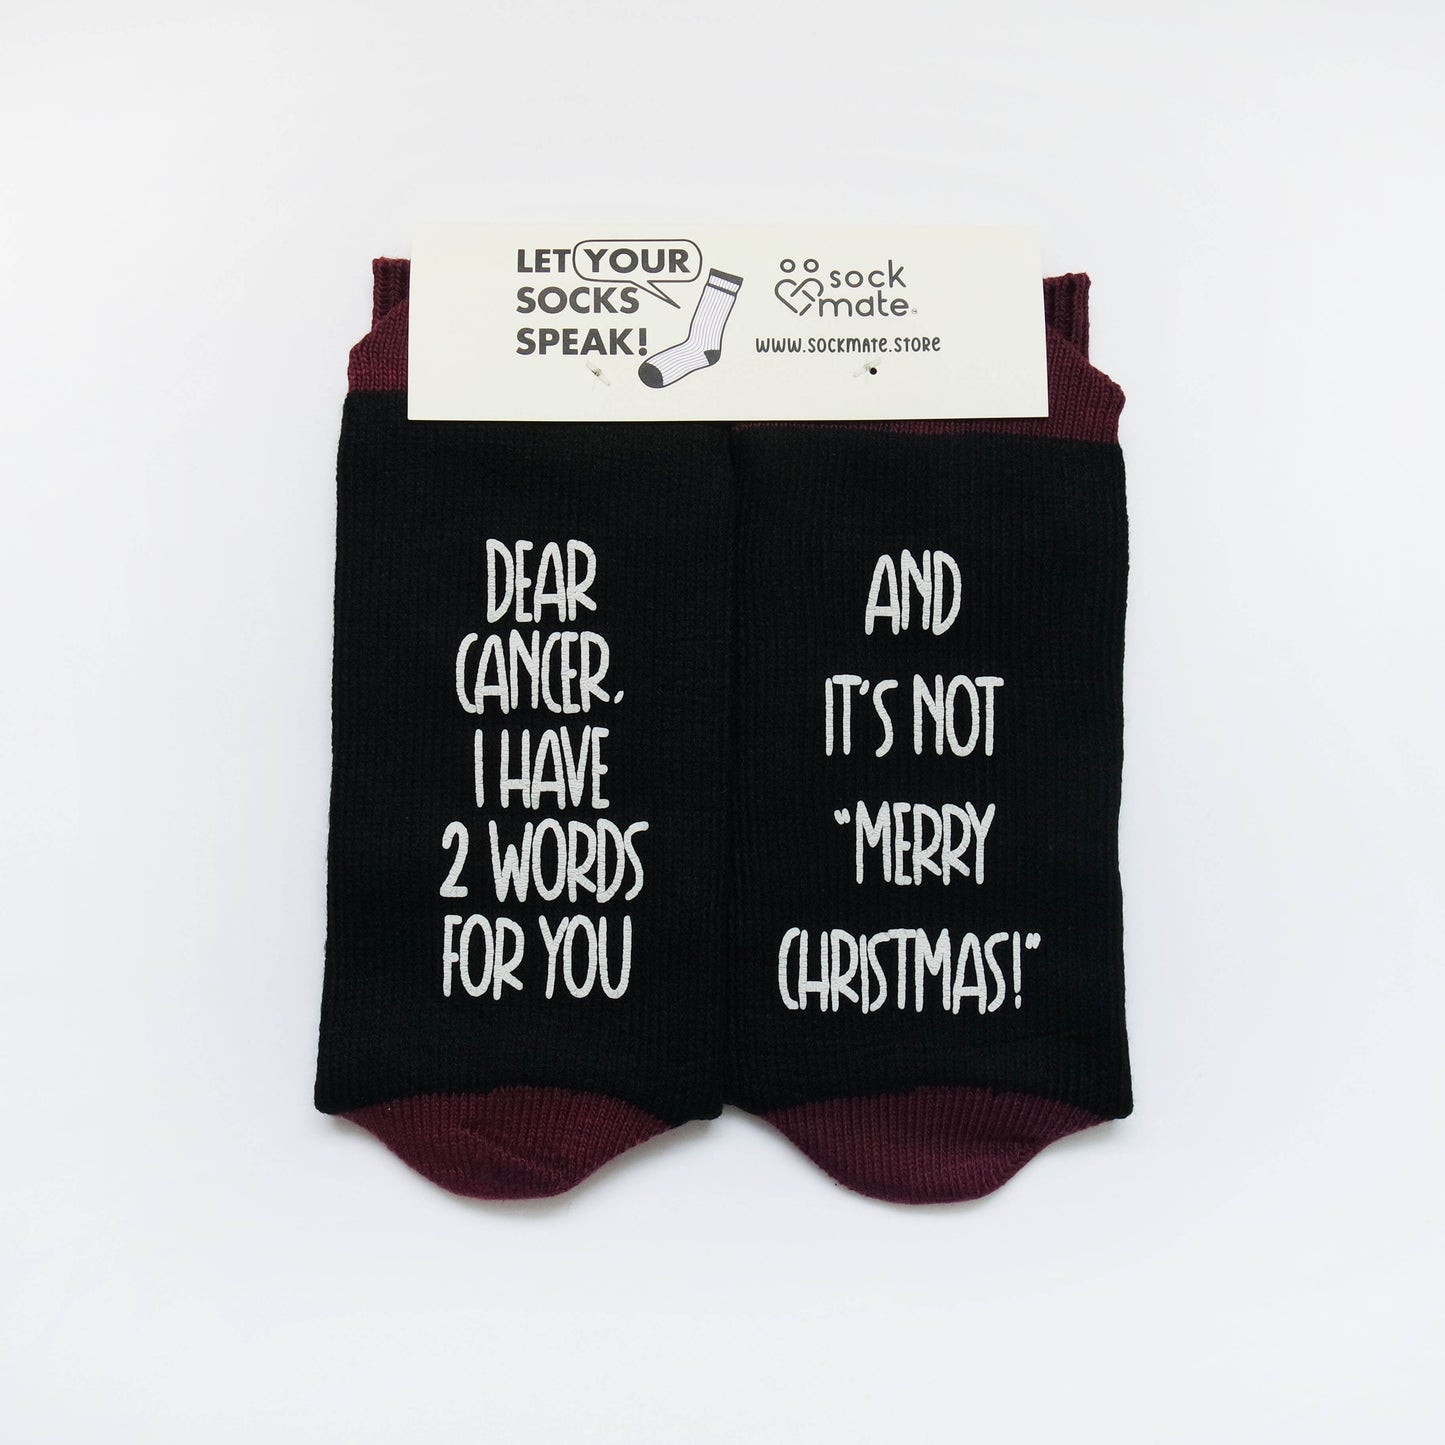 mens socks with a defiant message for cancer, expressing strength and resilience in the face of adversity.